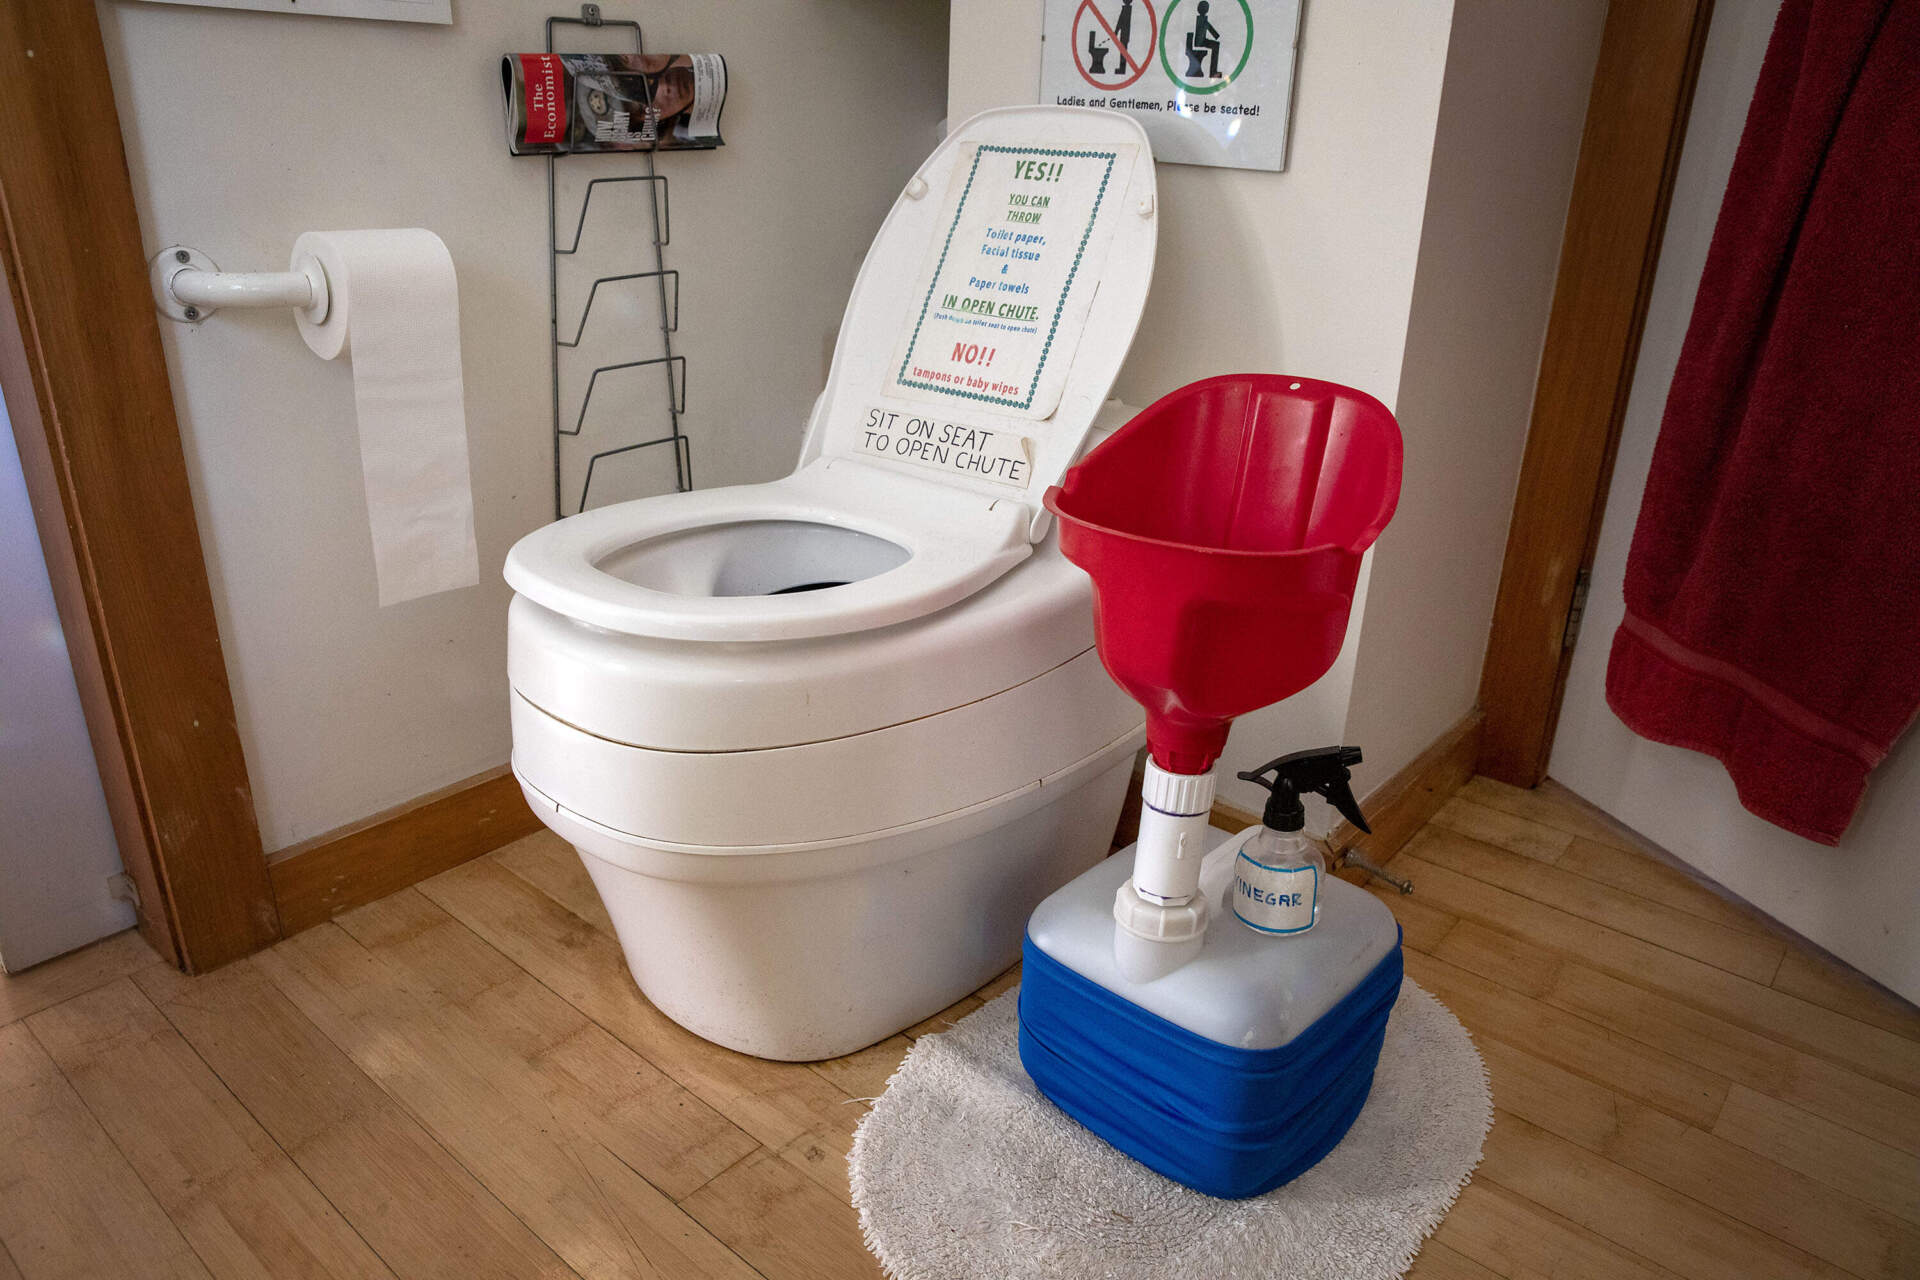 A composting toilet, which separates urine from other material, and a cubie unisex urinal, in the bathroom at the Green Center in East Falmouth, Mass.